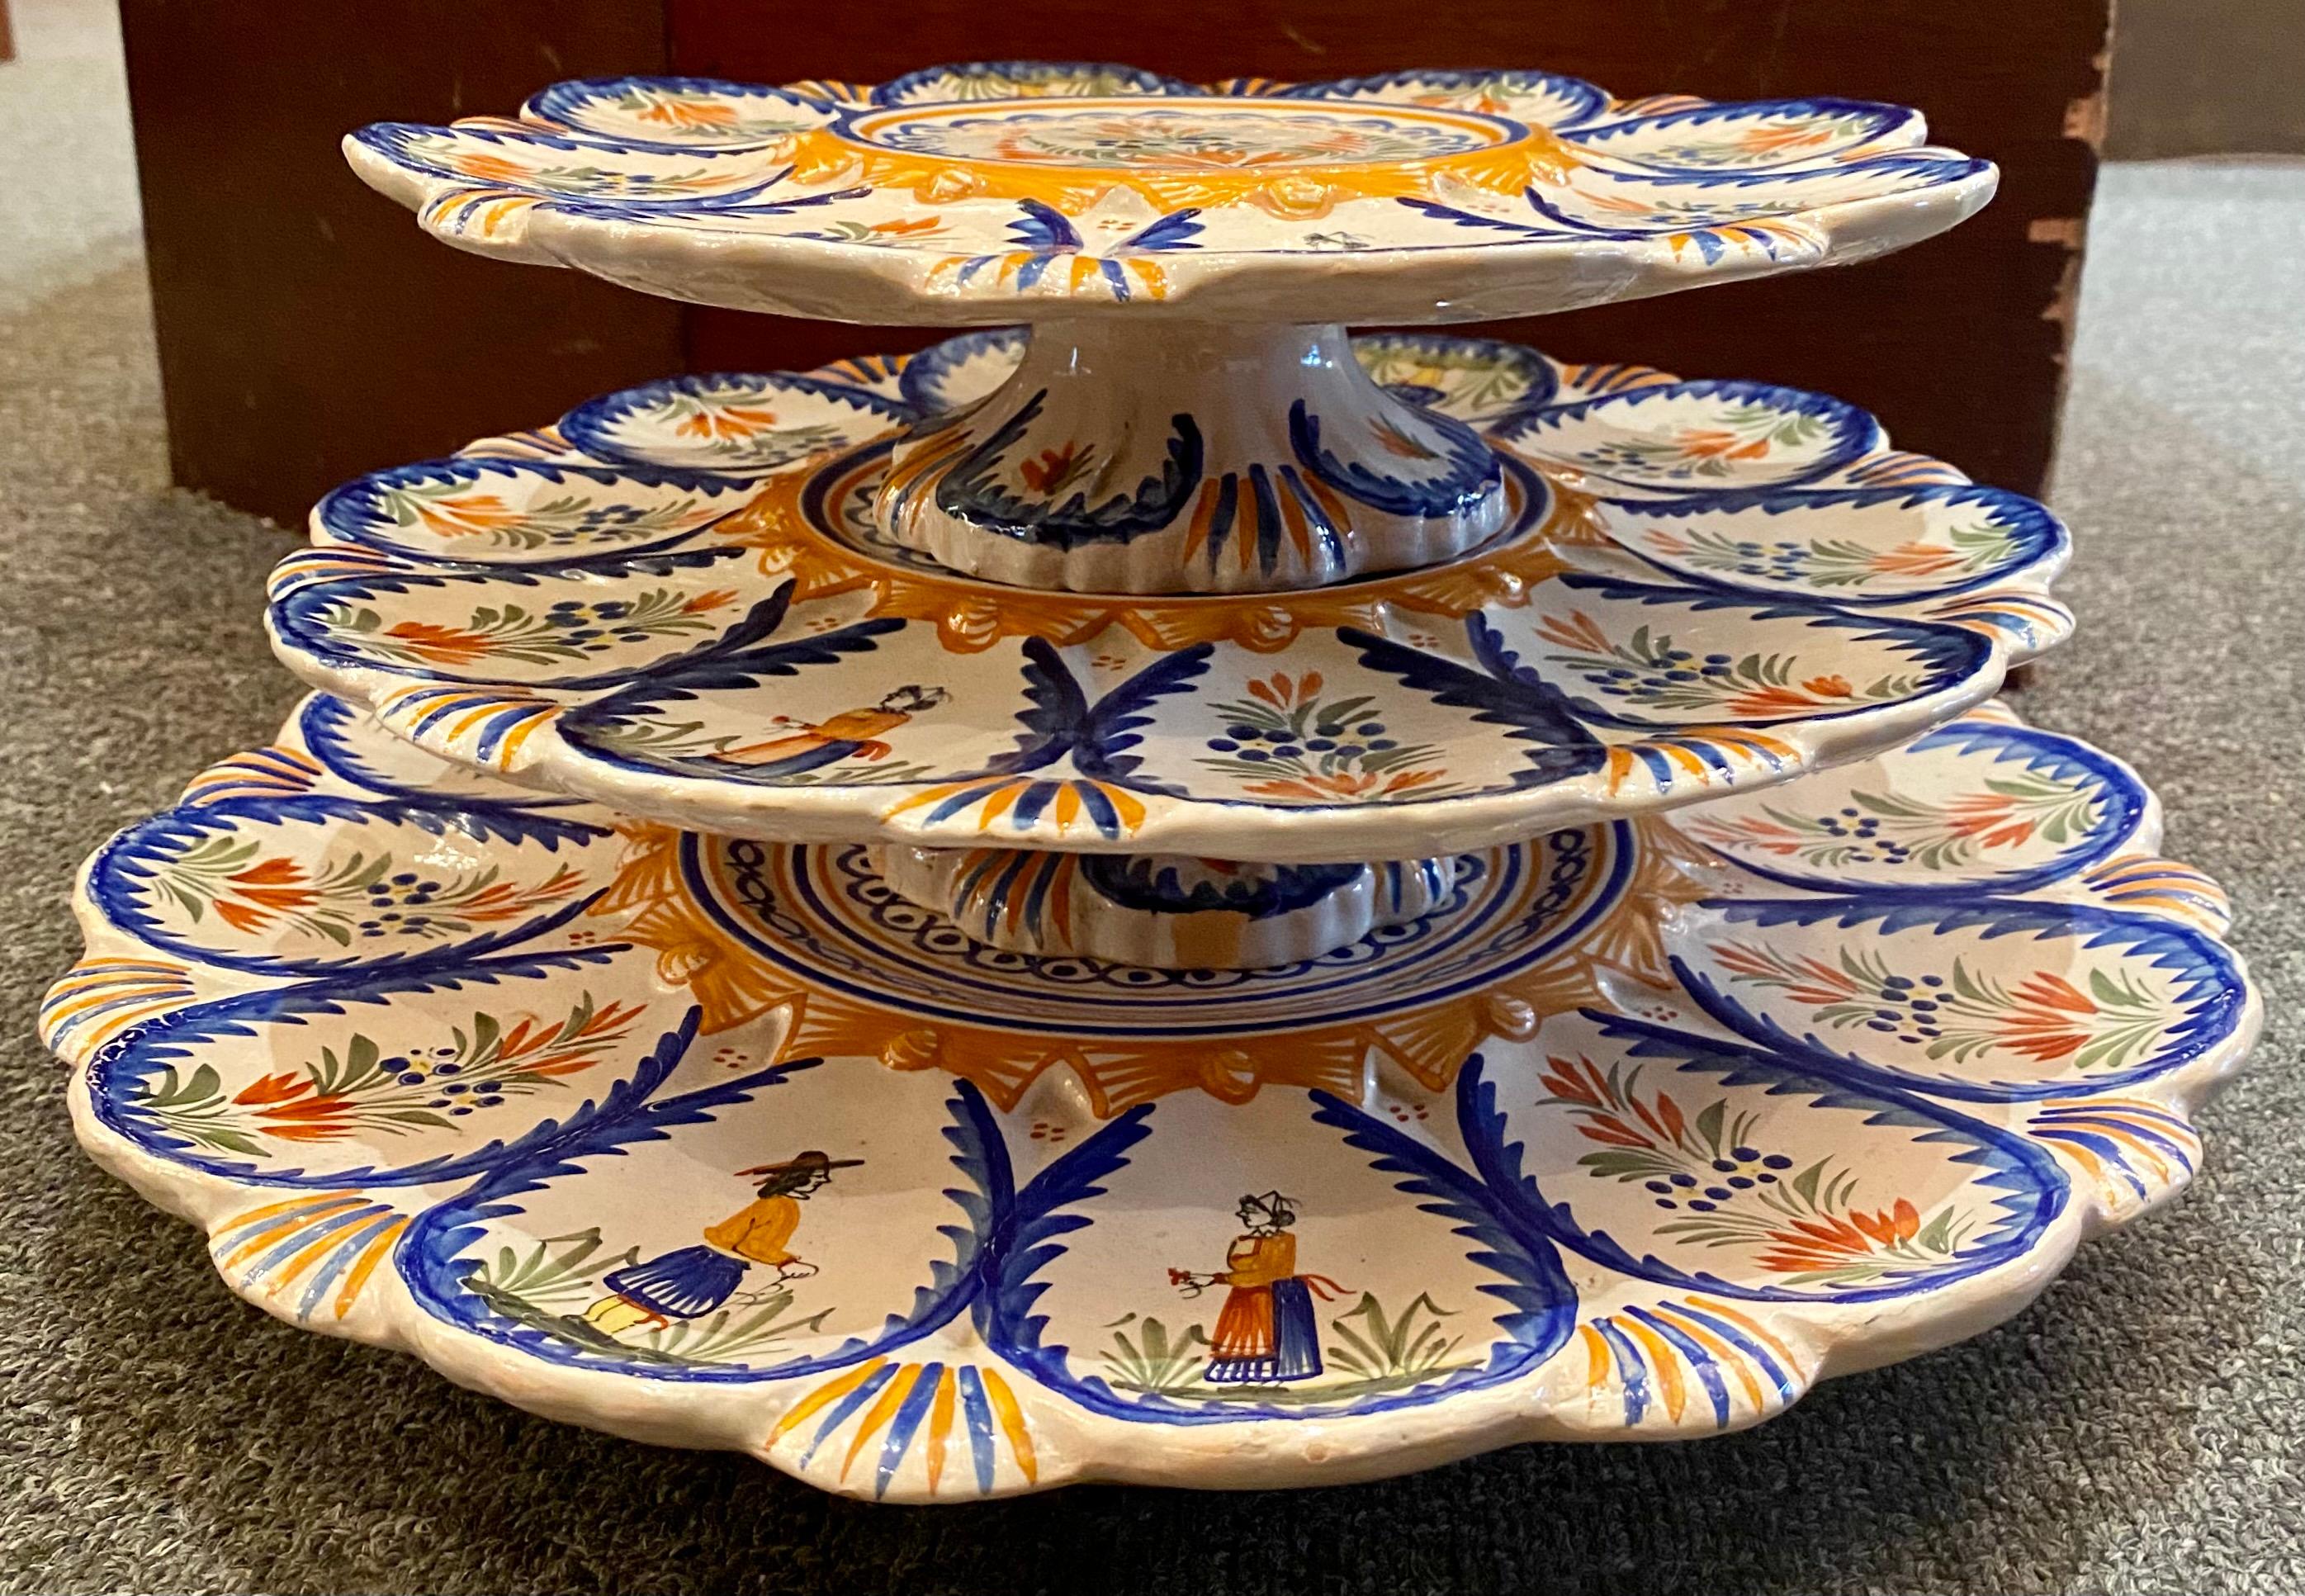 Estate French Faience hand painted pottery porcelain 3-tiered oyster platter signed Henriot Quimper, circa 1940s.
Each of the 3 tiers are removable.
Measures: 13 1/2